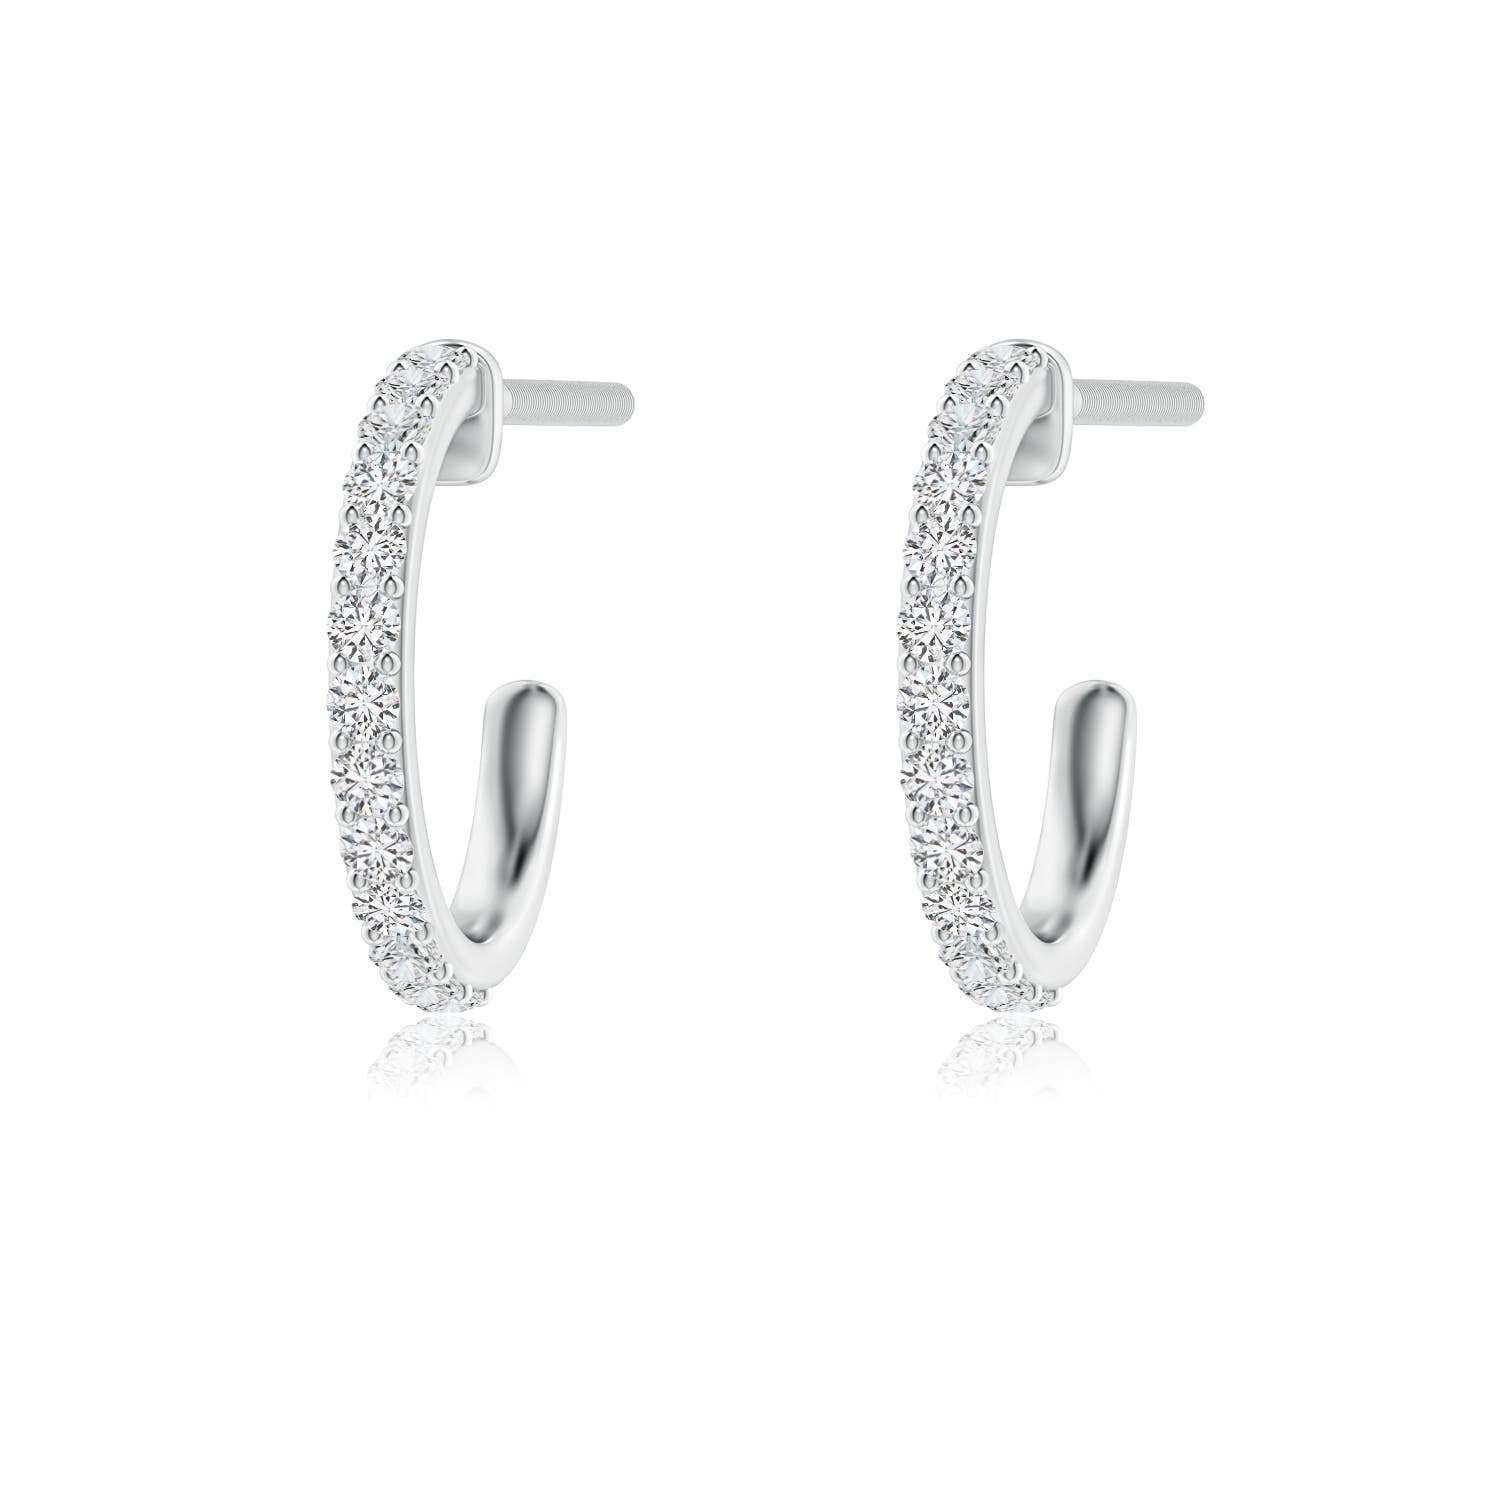 H, SI2 / 0.16 CT / 14 KT White Gold